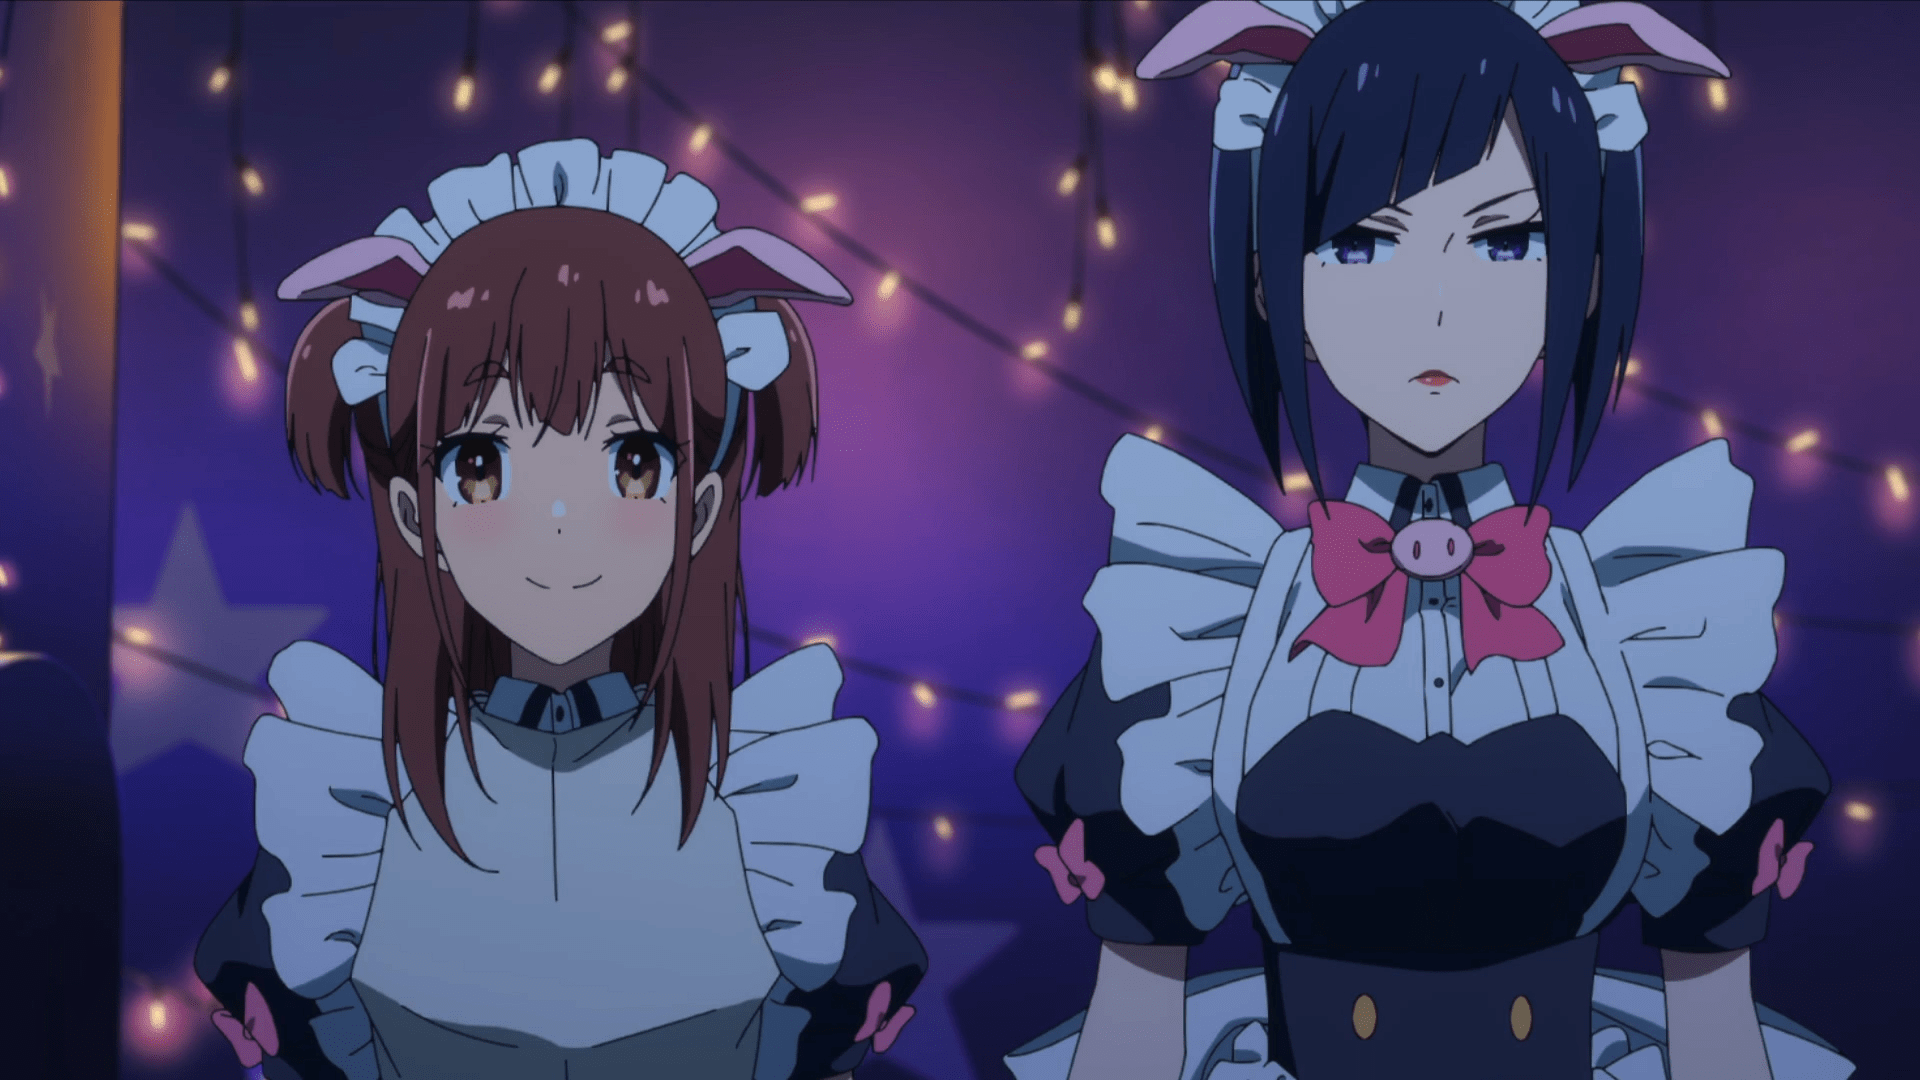 Akiba Maid War is the latest in a series of brutal maid and butler battles